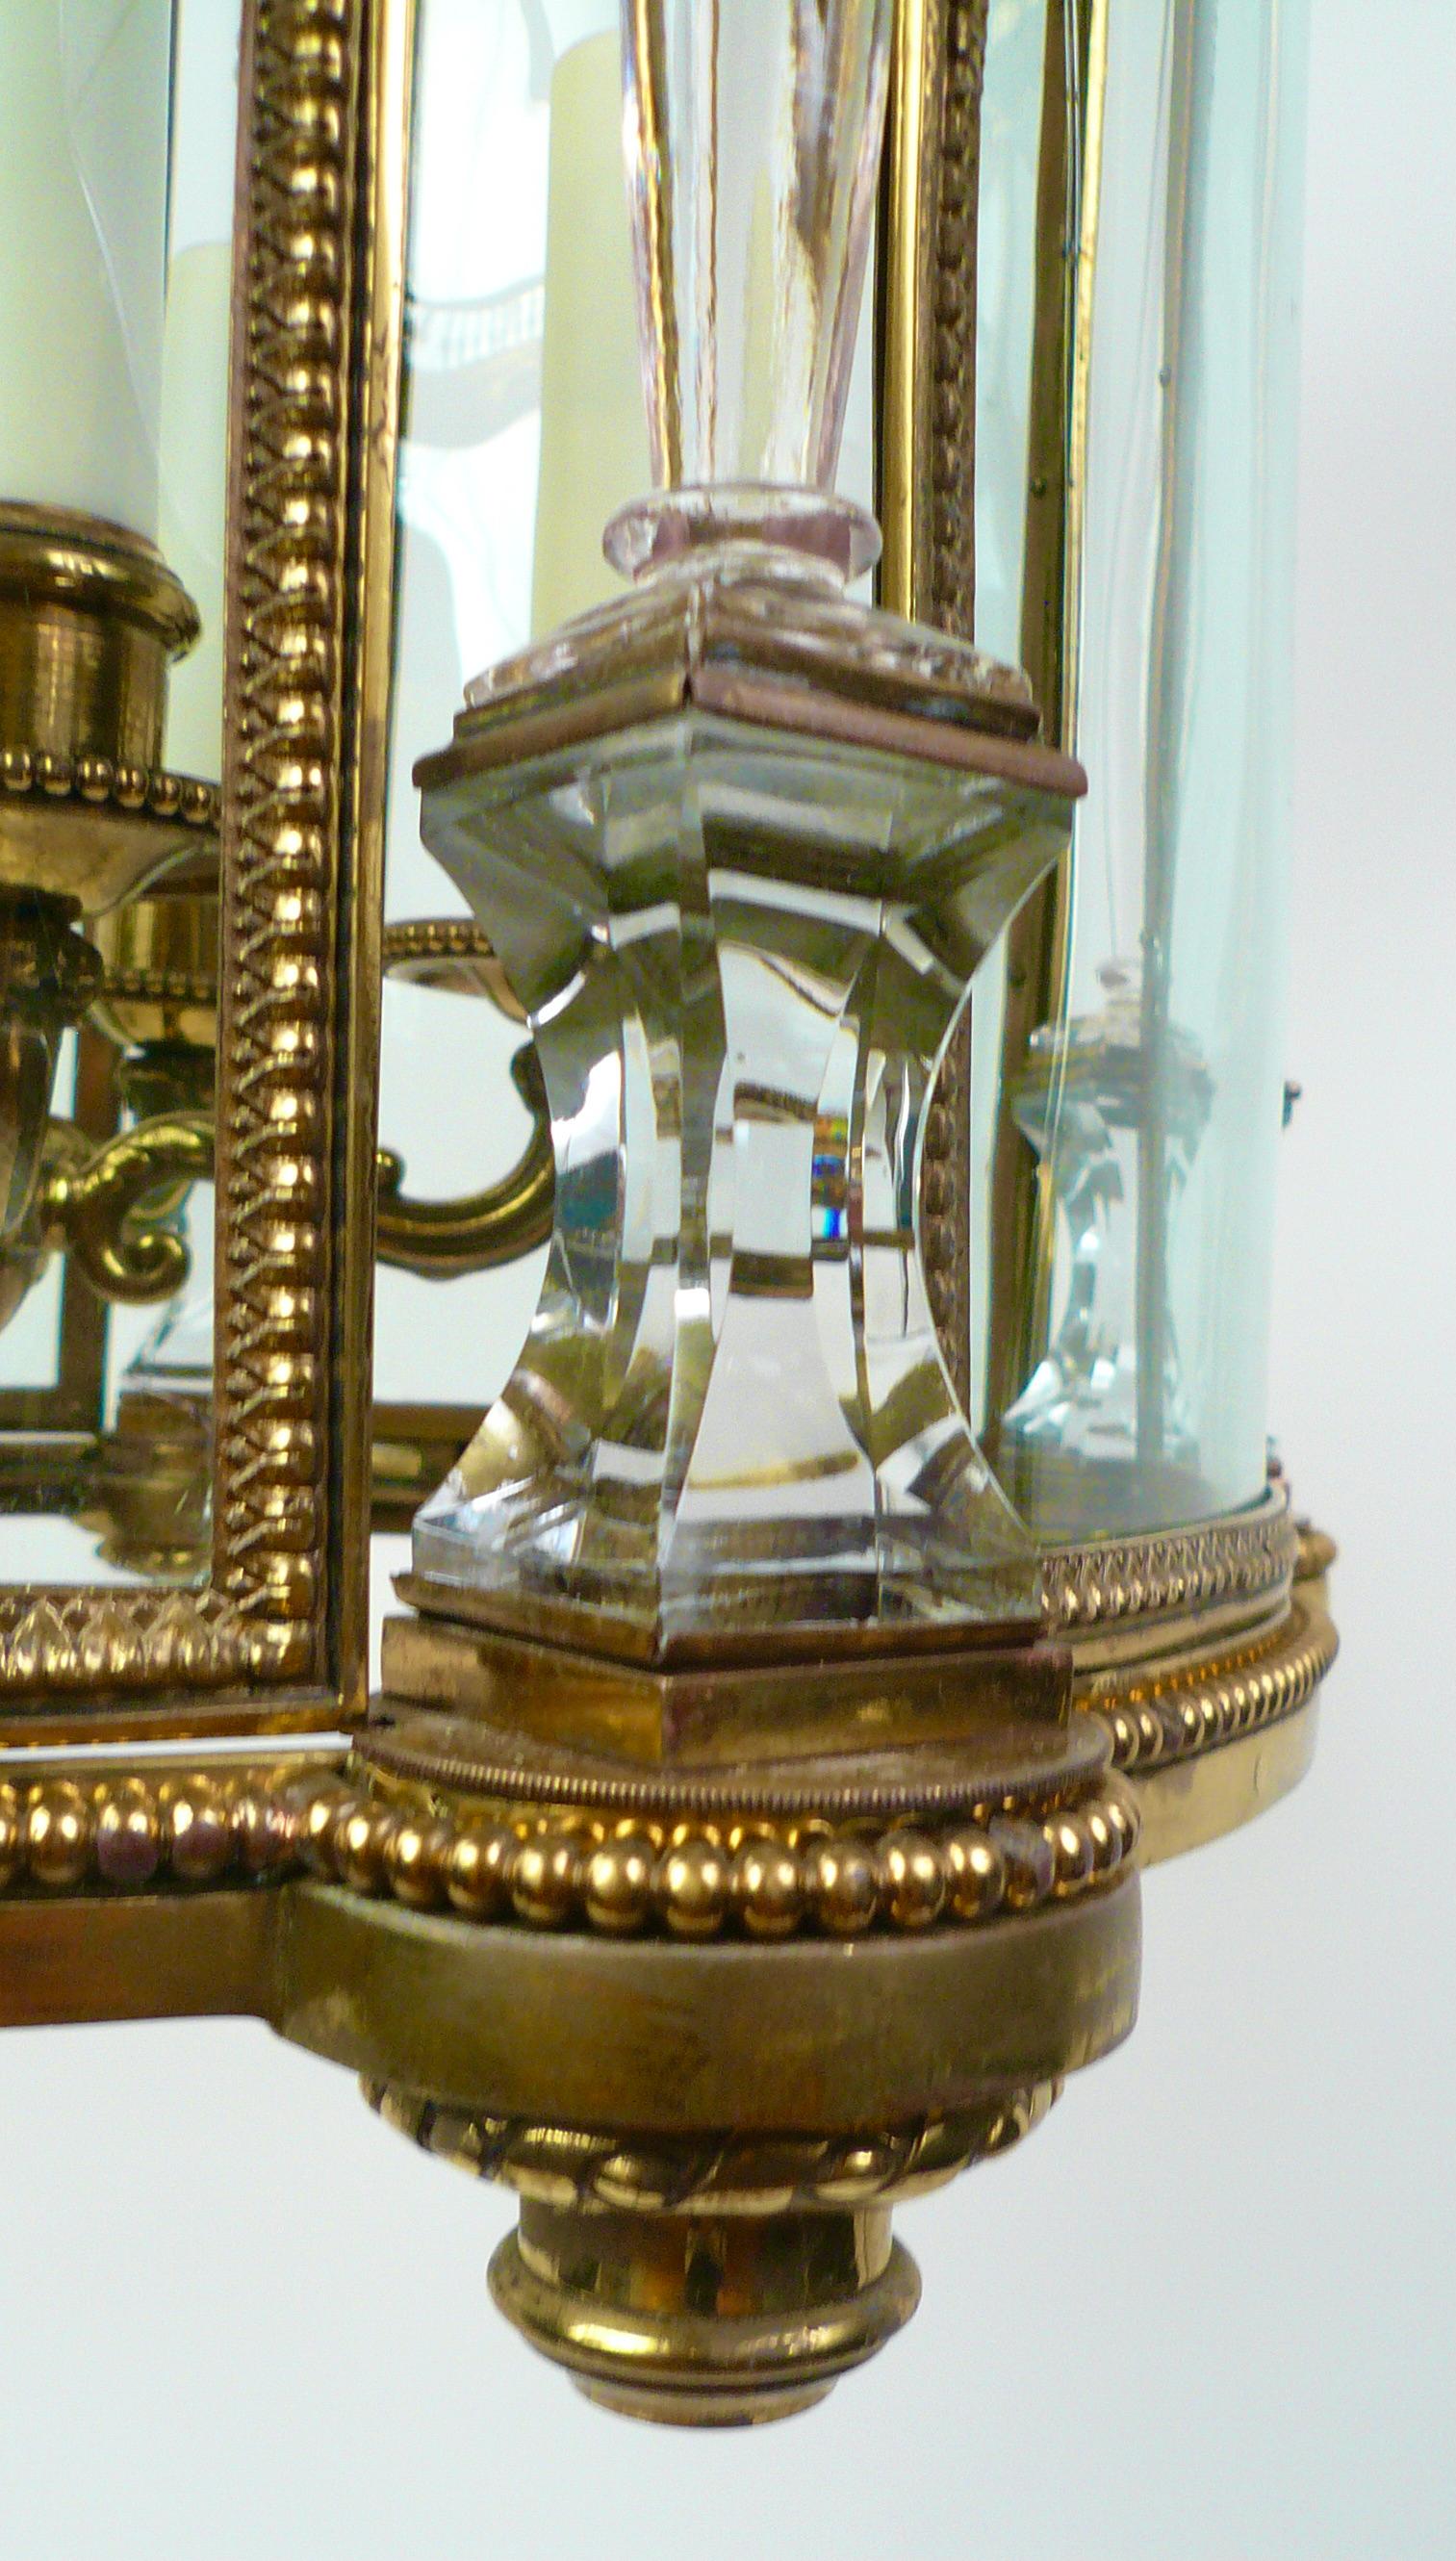 Georgian Neo-Classical Style Bronze Lantern with Crystal Columns by E. F. Caldwell